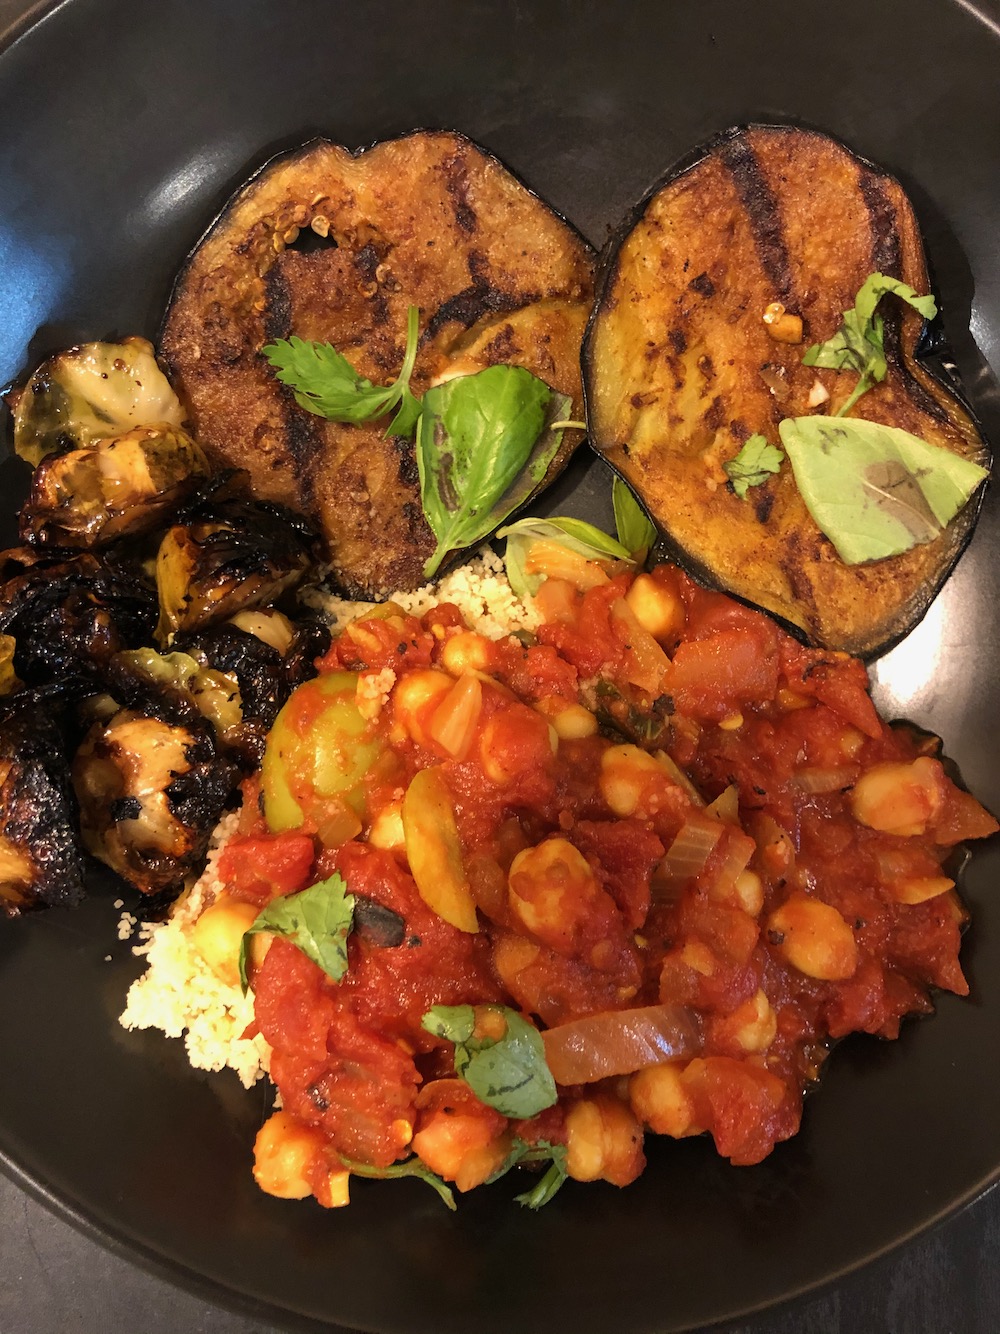 The grilled eggplant with chickpeas simmered in tomato sauce.